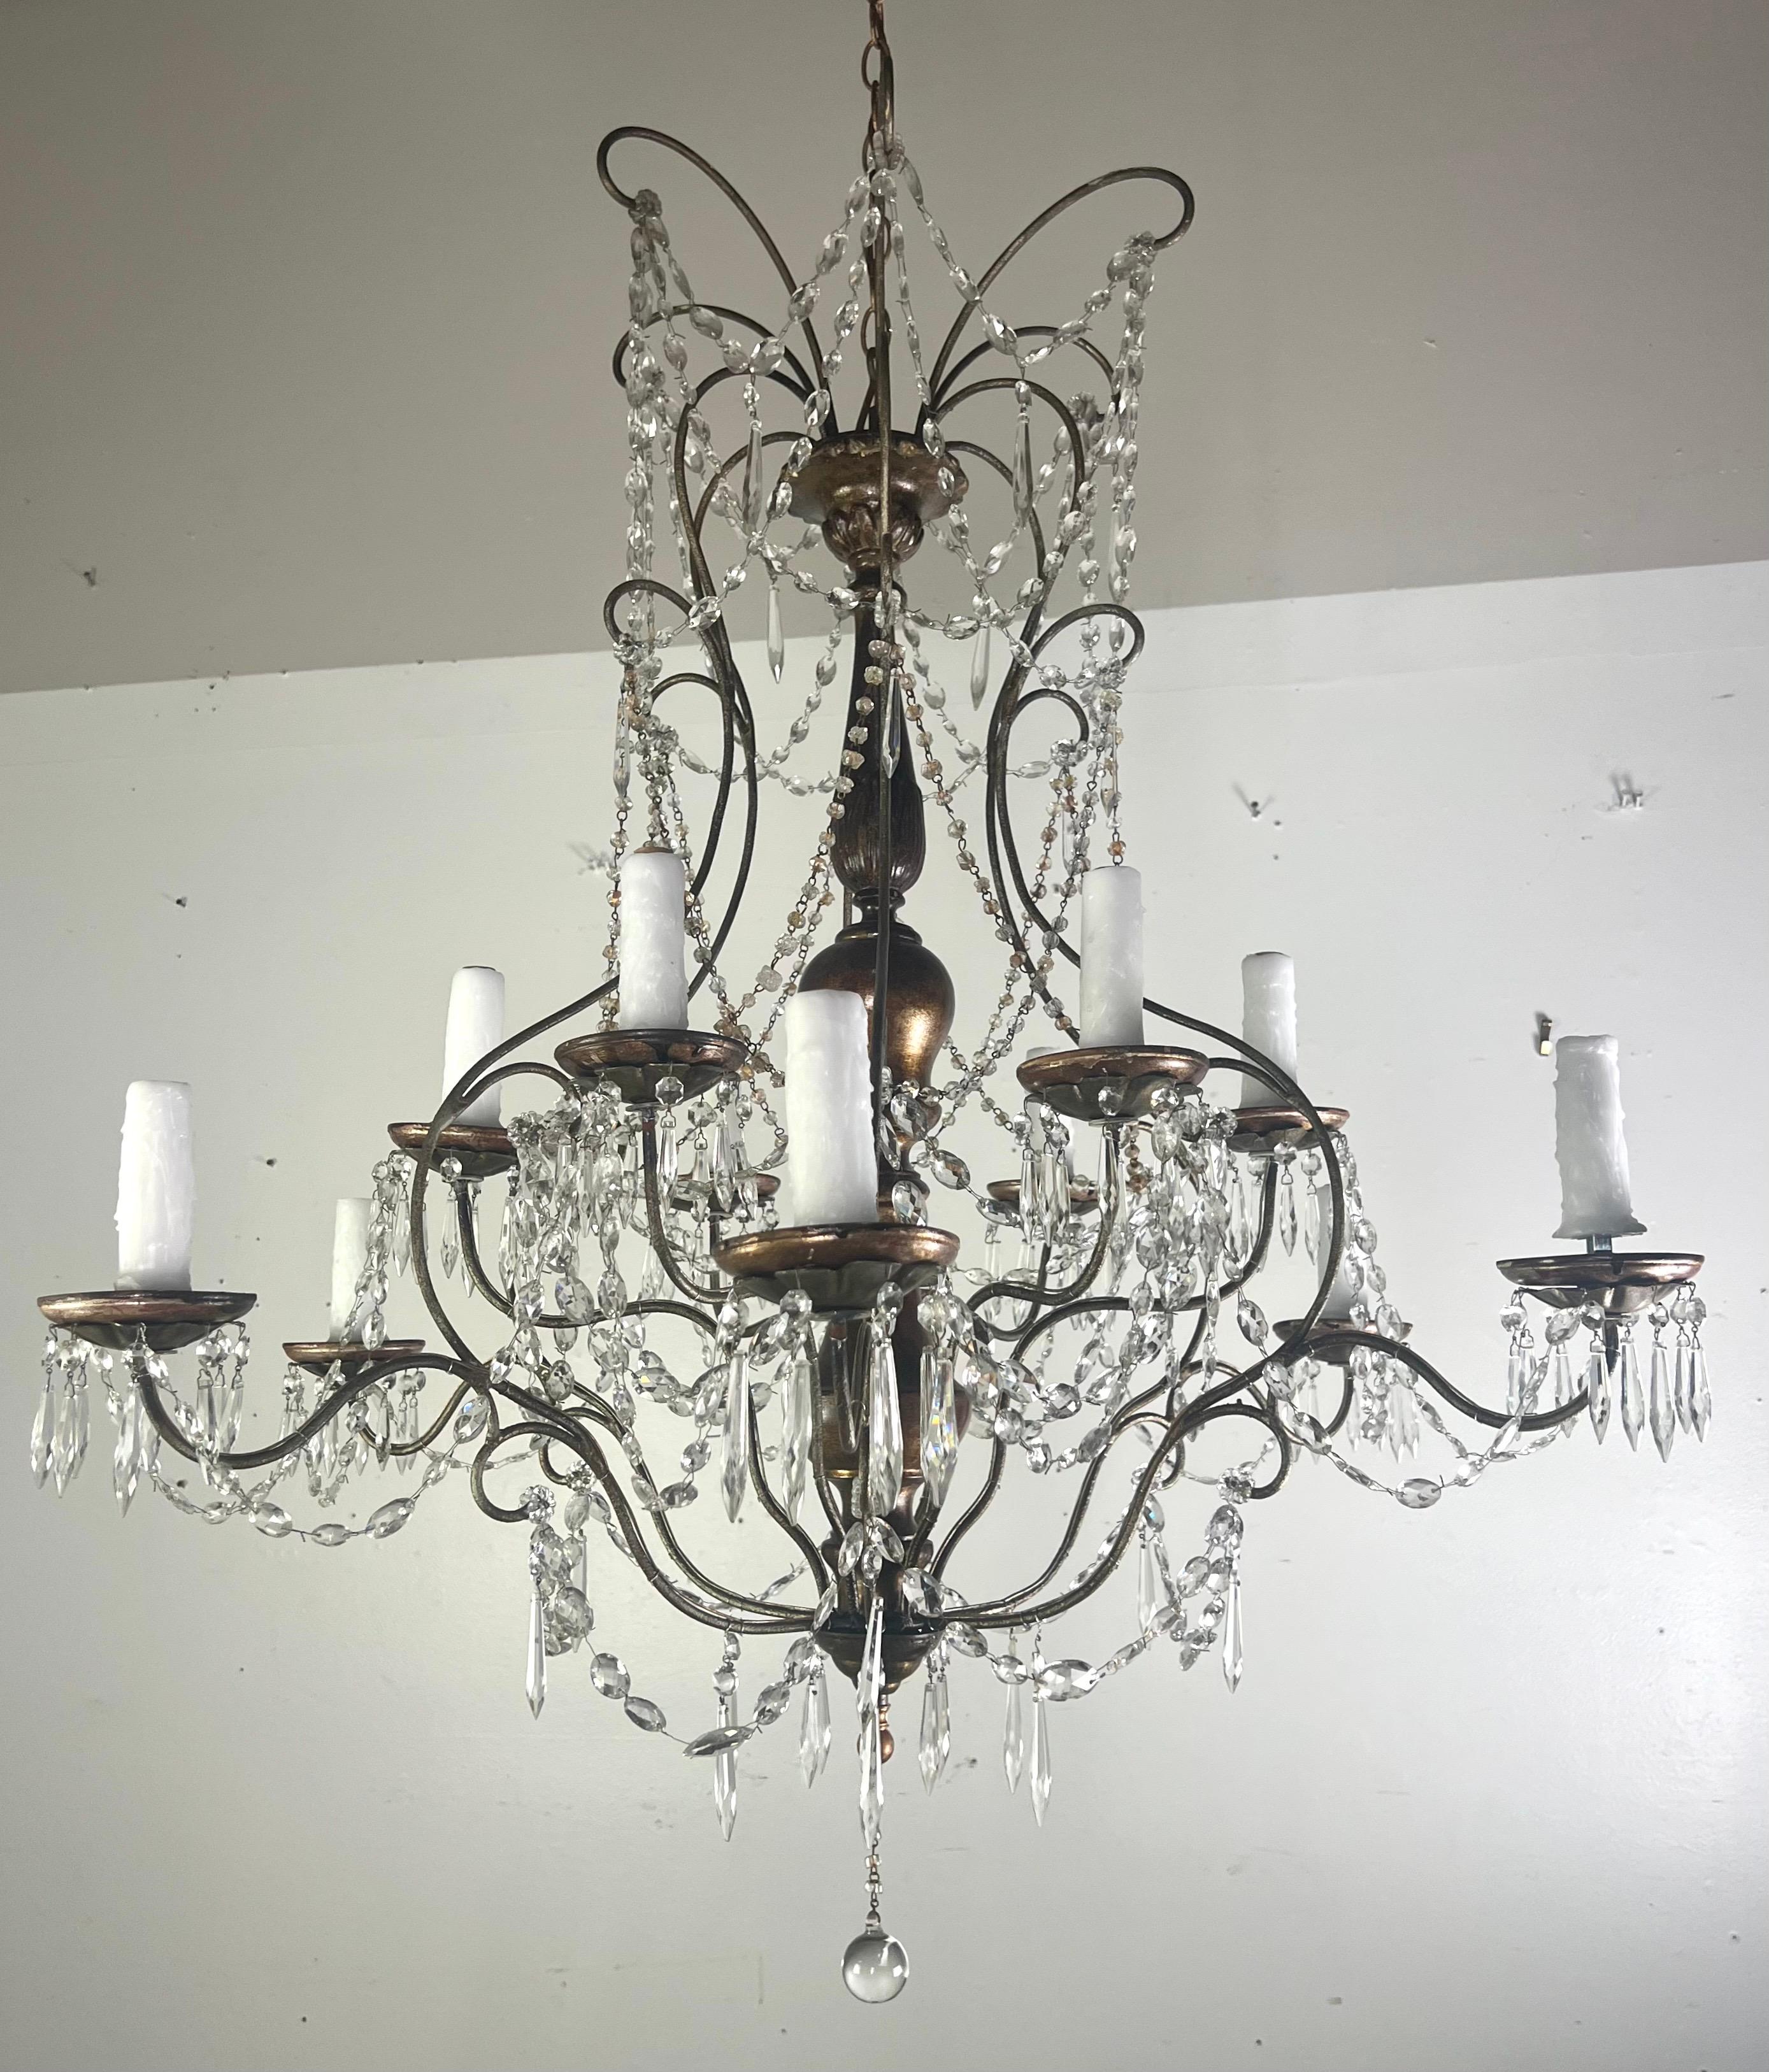 Italian (12) light gilt wood & crystal chandelier.  The (12) arms curve outward from a center gilt wood column, each supporting a drip wax candle cover for light bulbs.  The chandelier is adorned with clear crystal drops and garlands of beaded